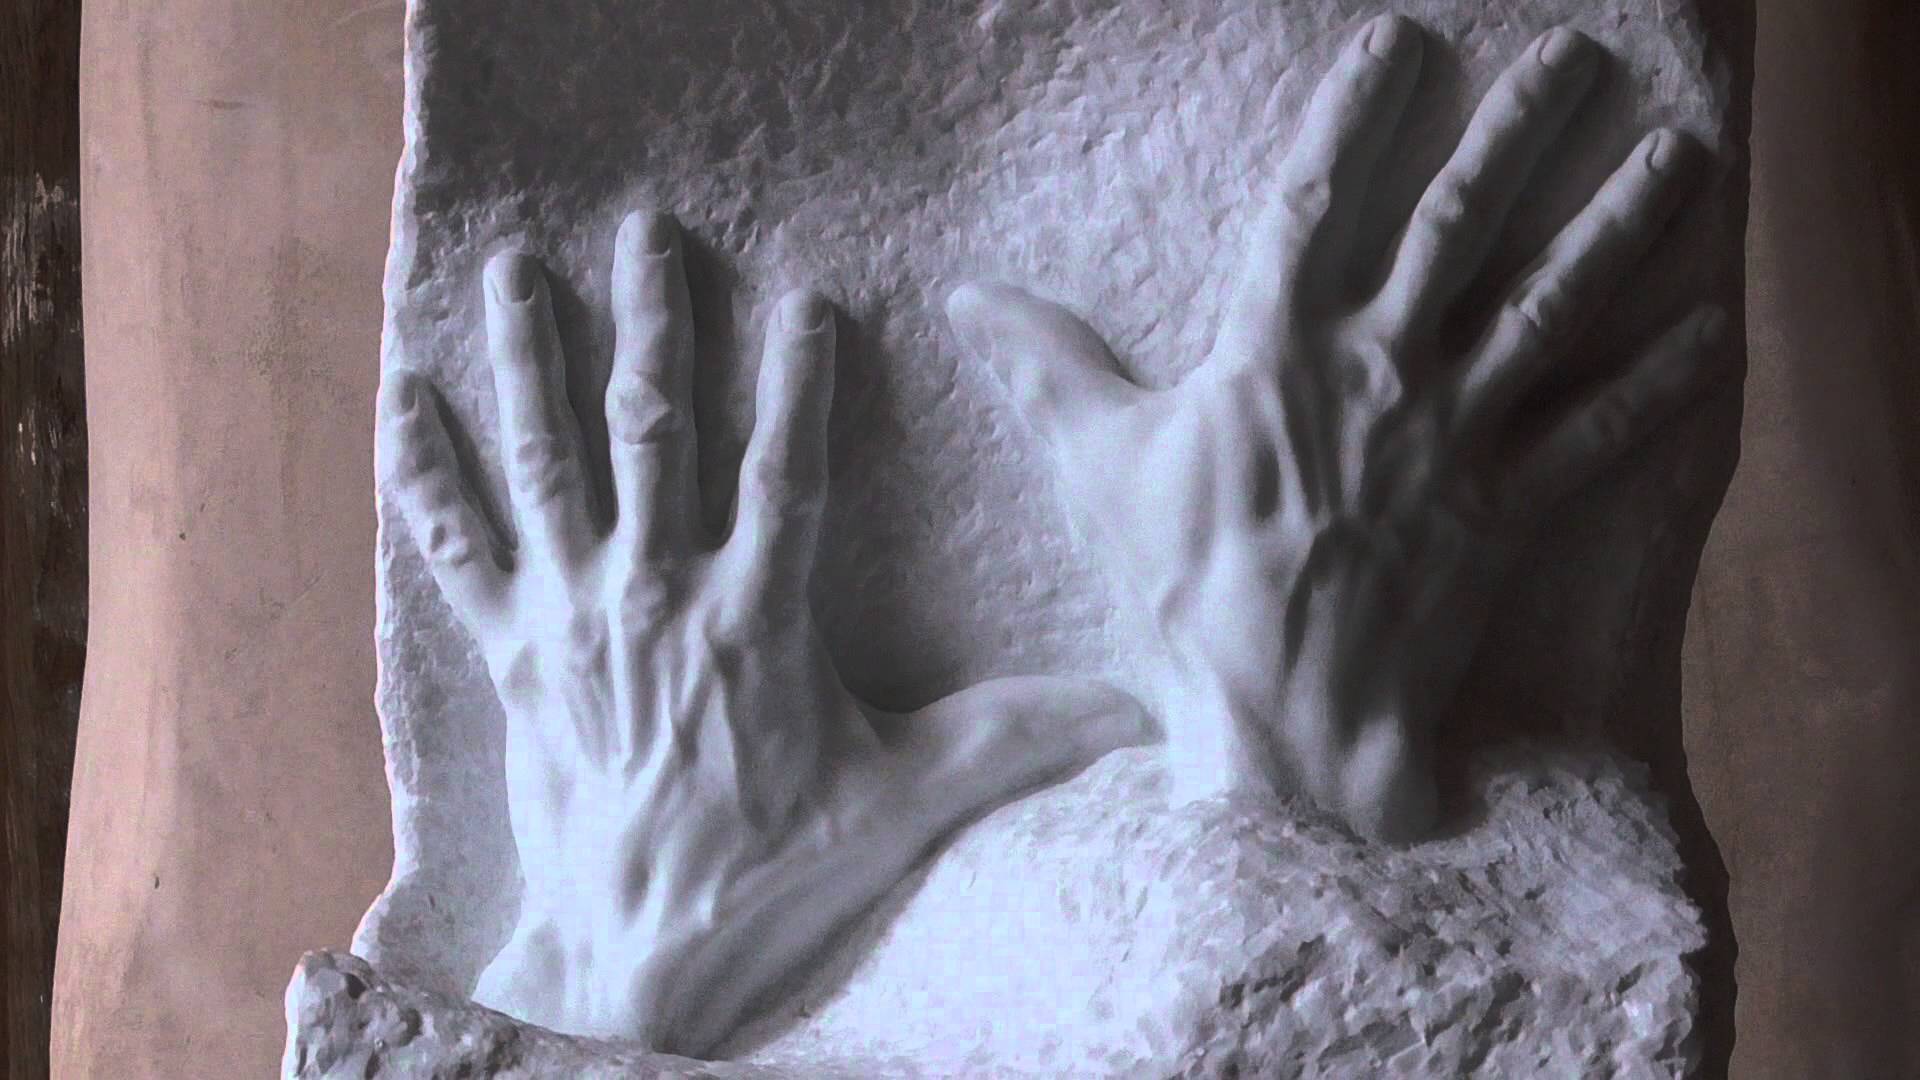 Carving Hands in Carrara Marble. - YouTube